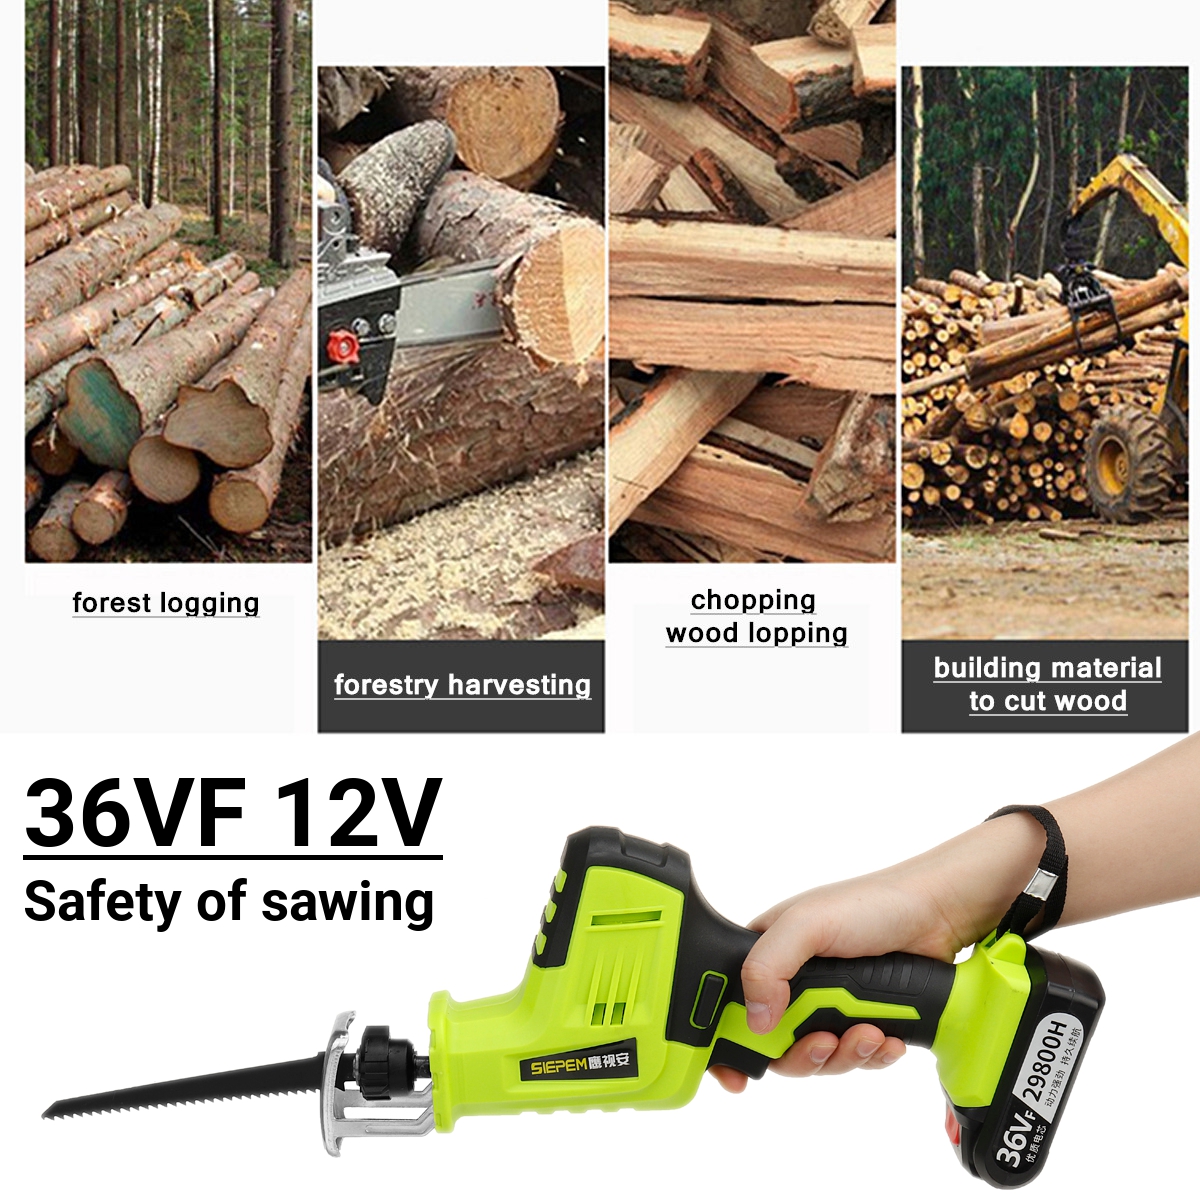 12V-Cordless-Electric-Reciprocating-Saw-Portable-Garden-Cutting-Tool-Saws-with-1-or-2-Battery-1772582-2